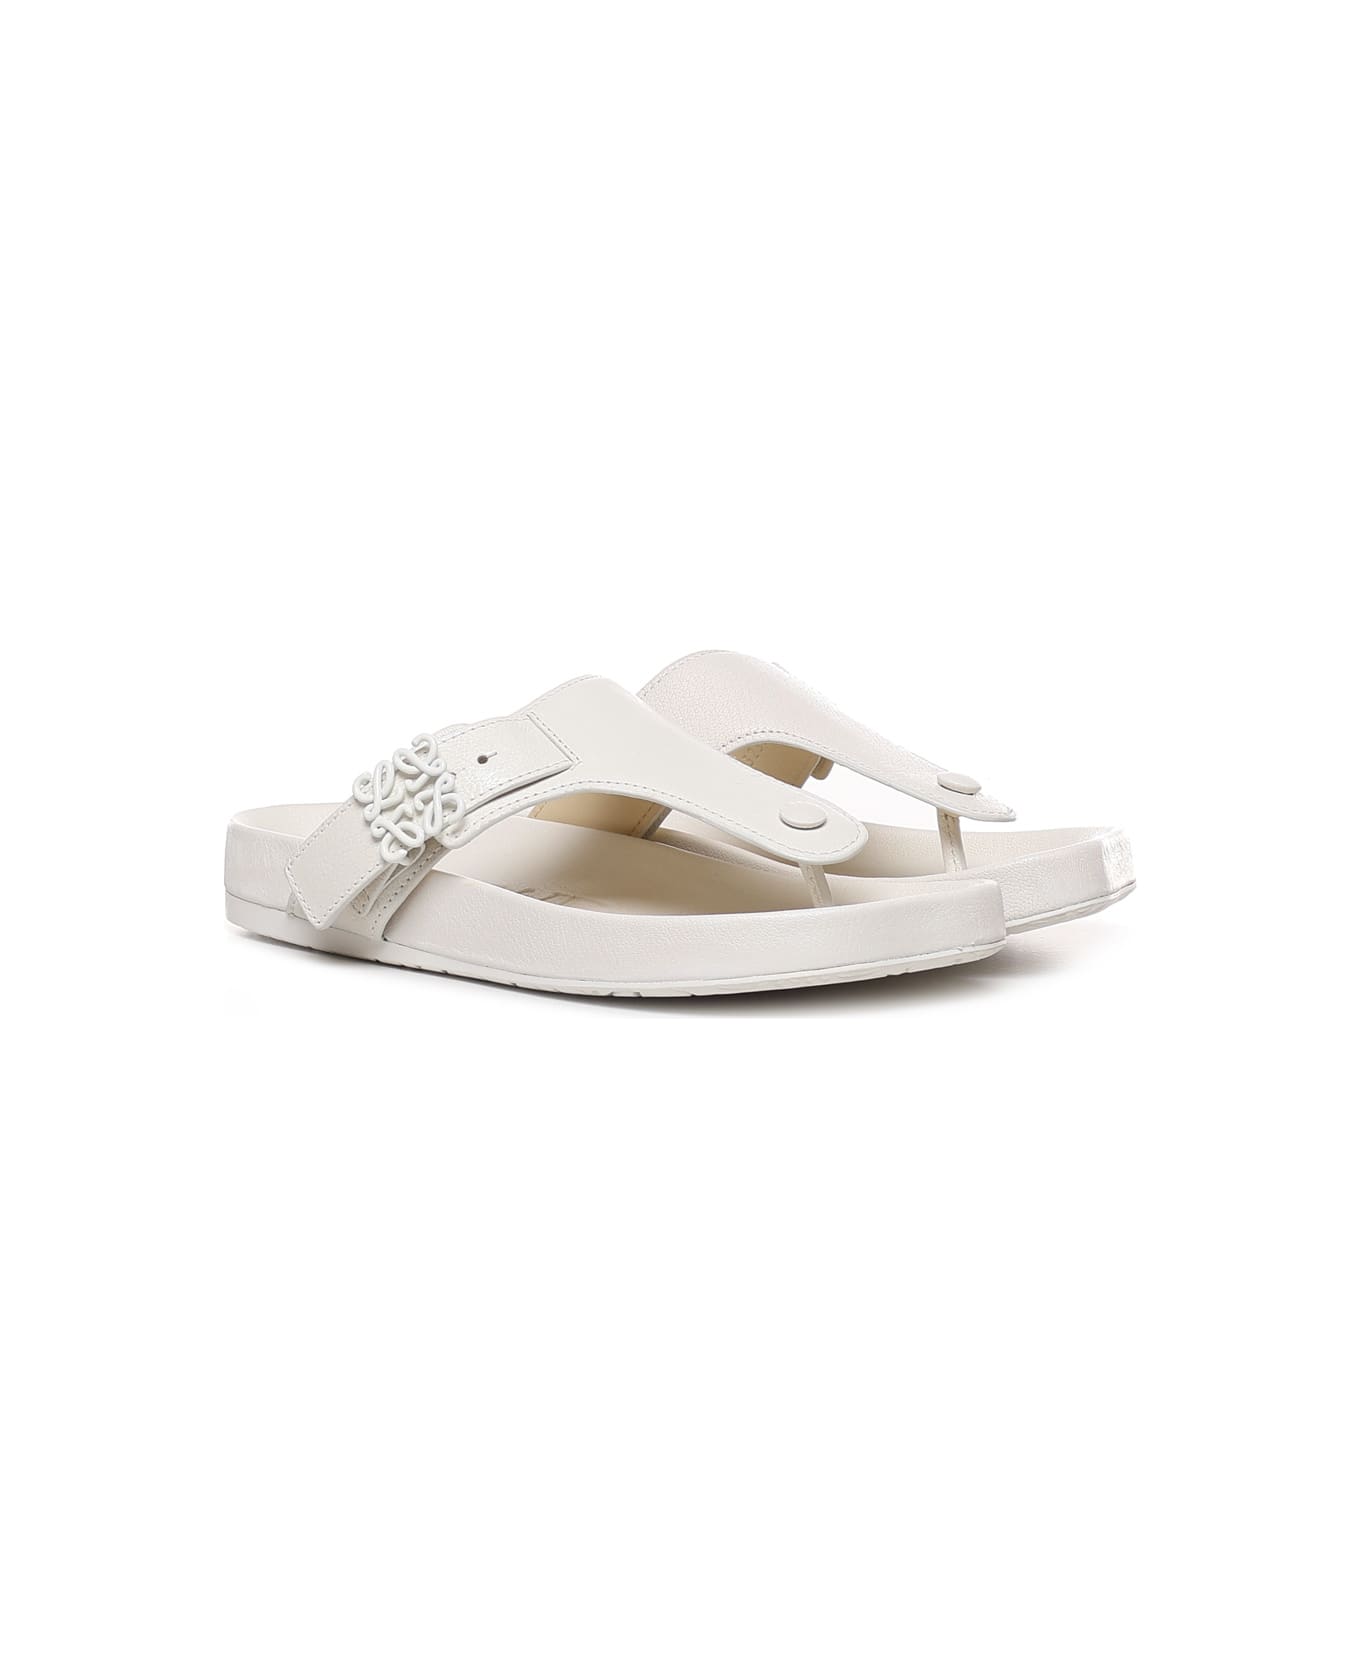 Loewe Ease Sandals In Rubber - White